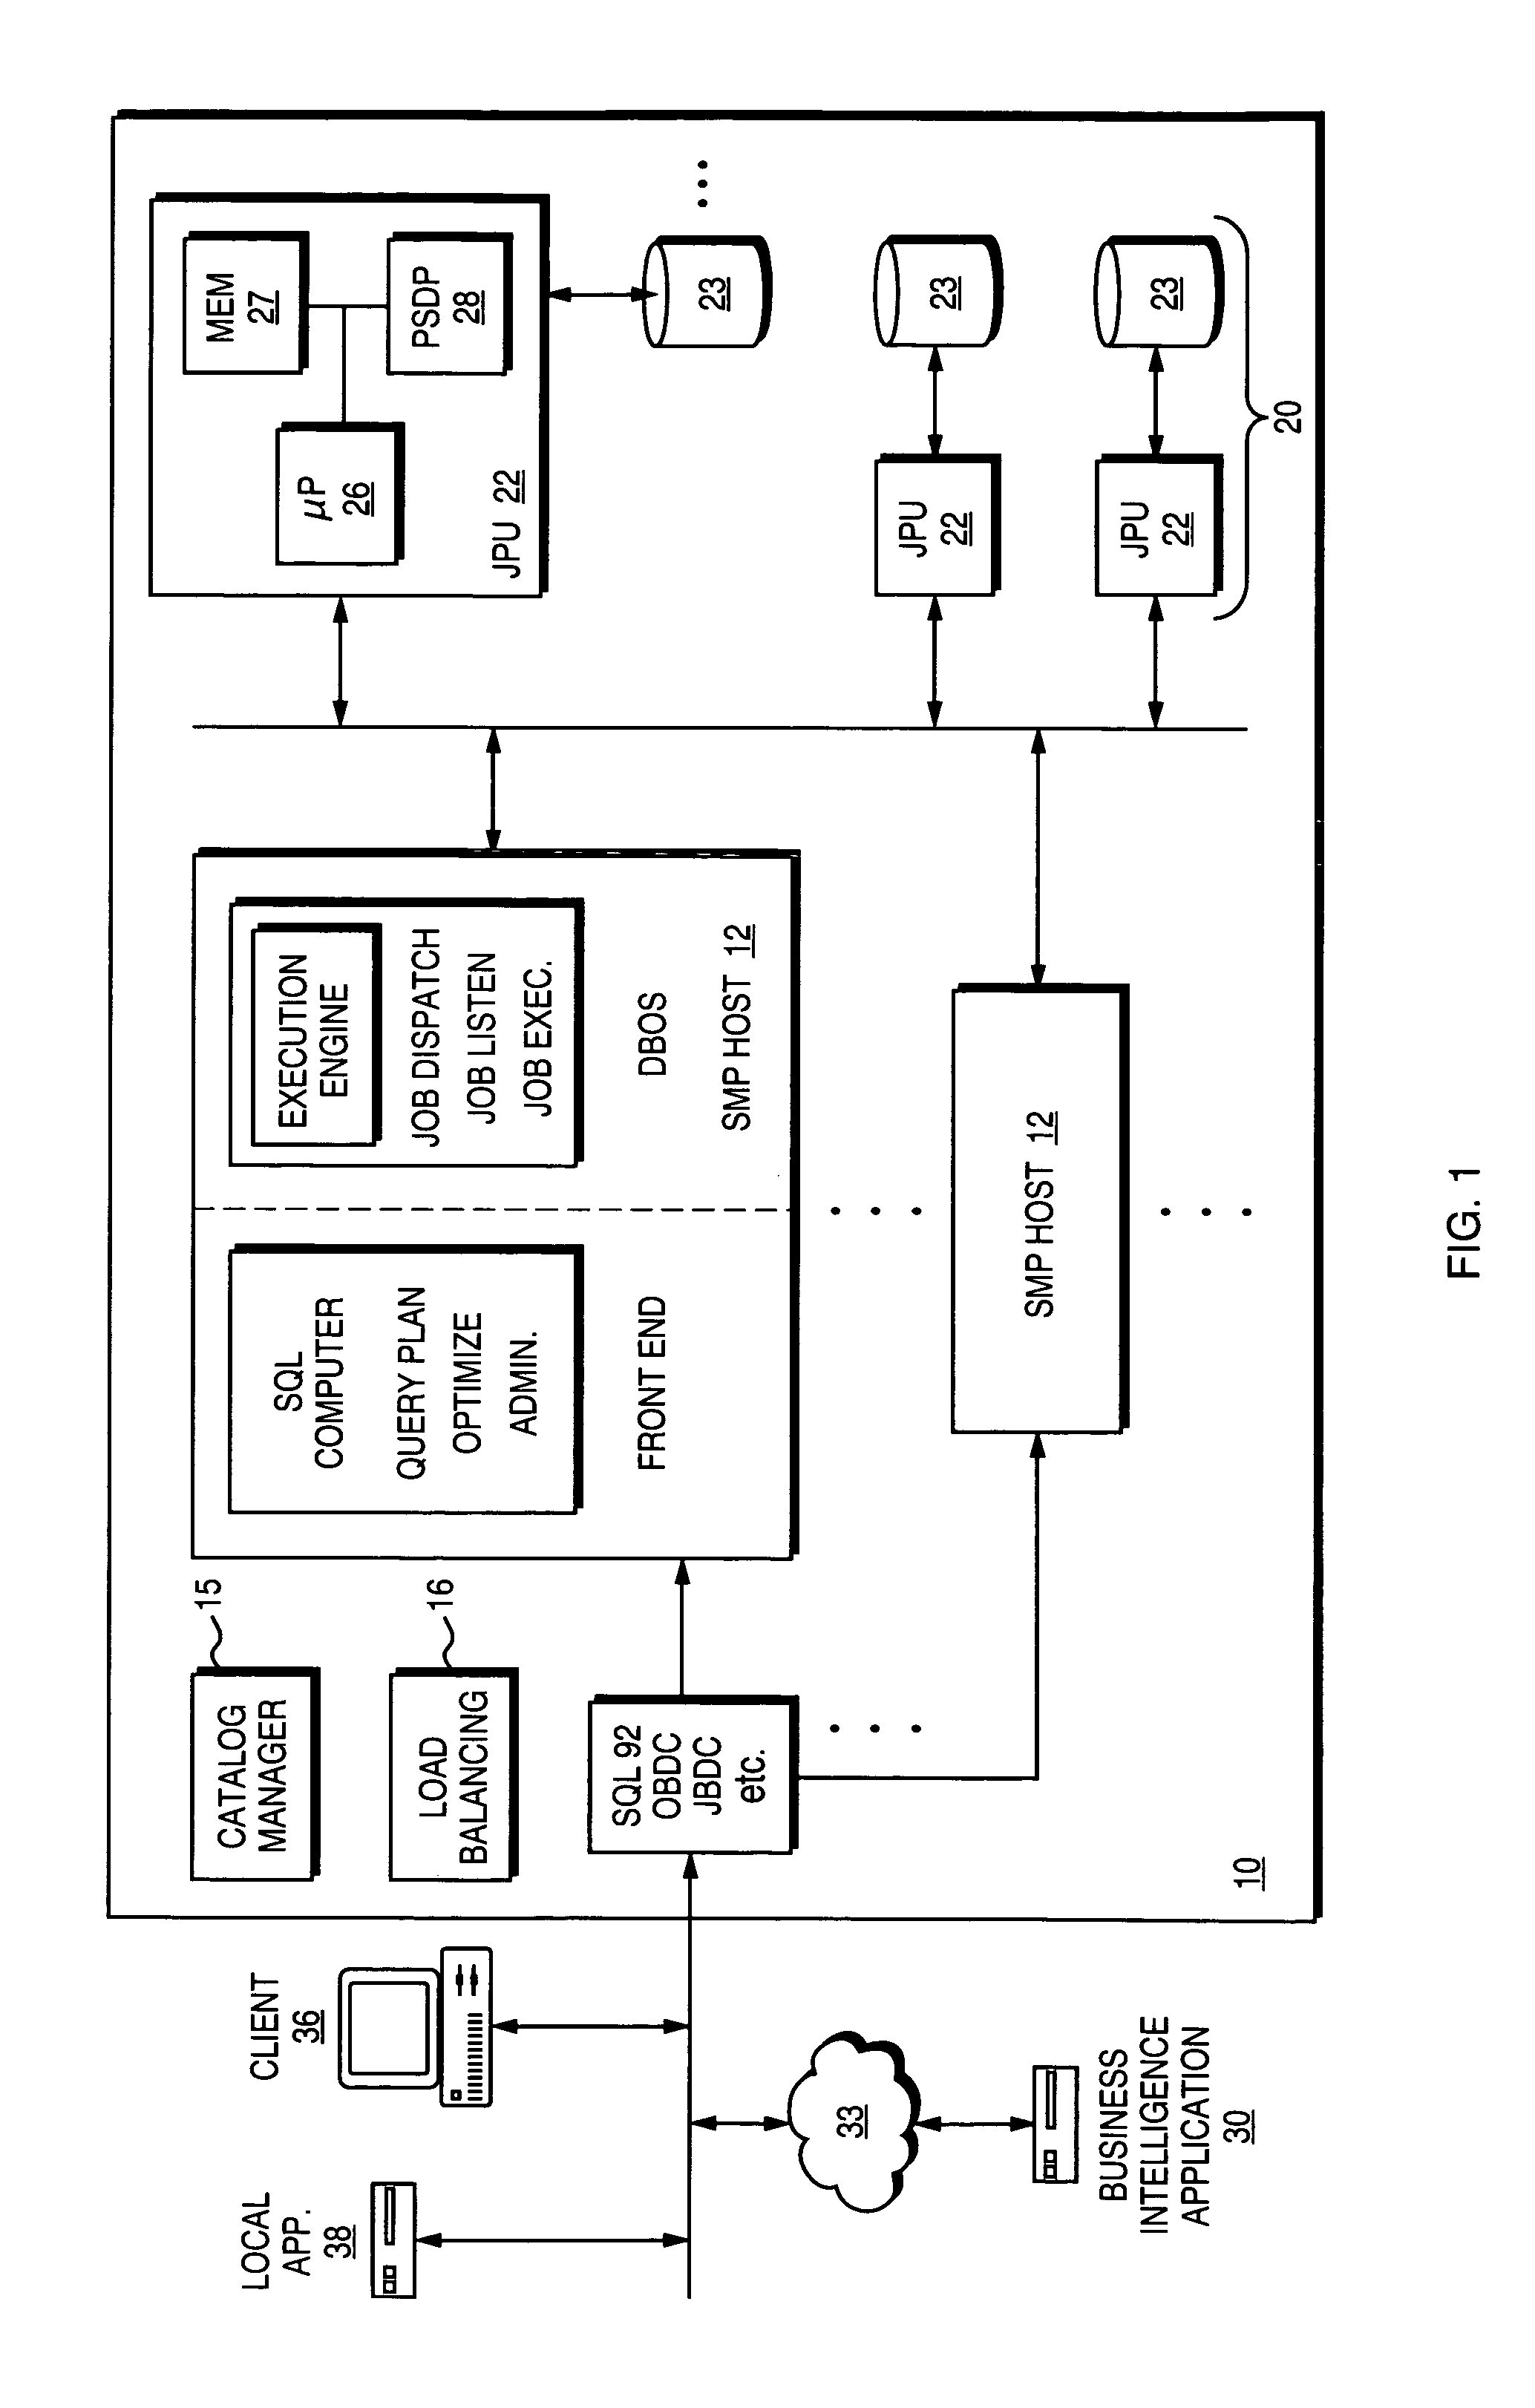 Programmable streaming data processor for database appliance having multiple processing unit groups